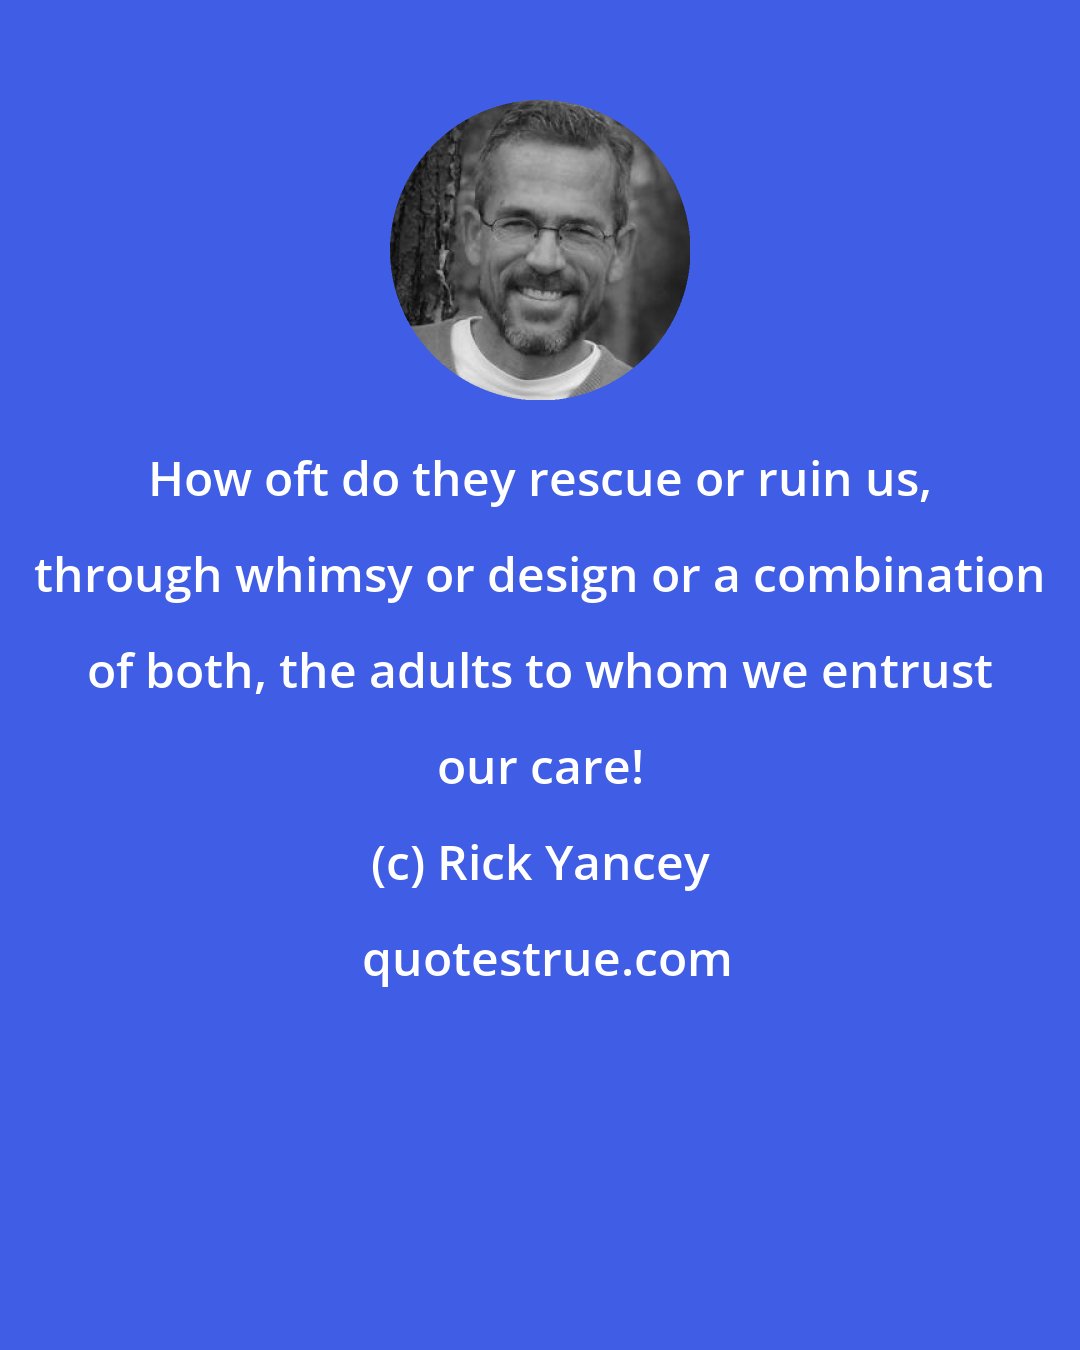 Rick Yancey: How oft do they rescue or ruin us, through whimsy or design or a combination of both, the adults to whom we entrust our care!